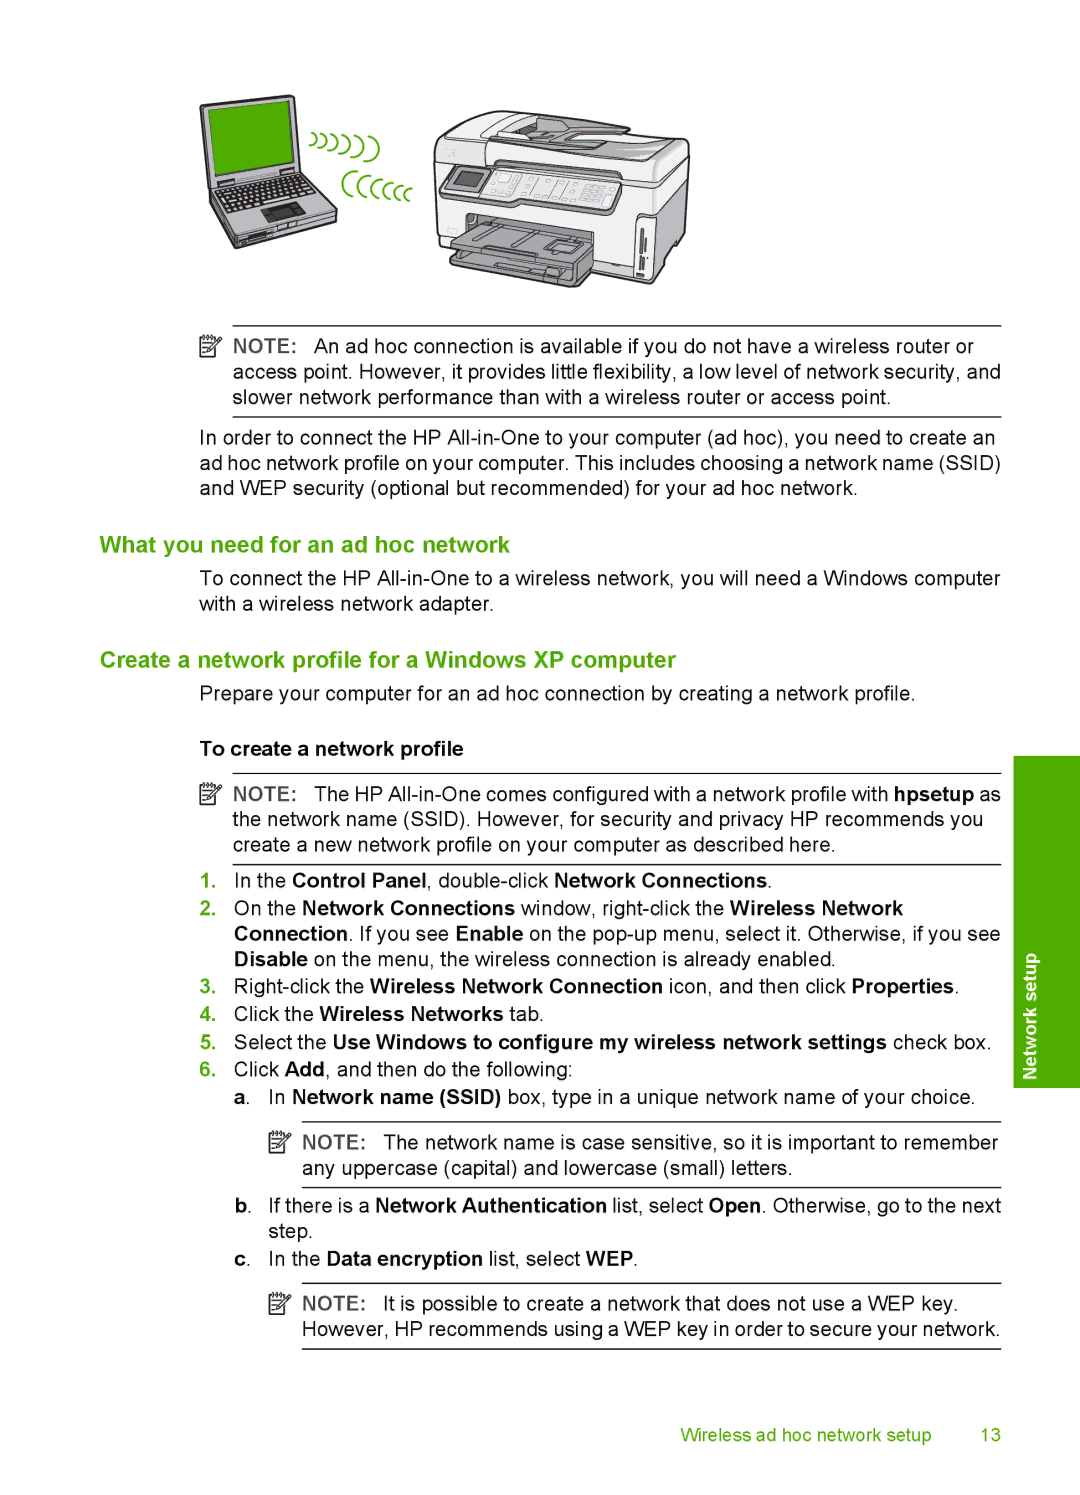 HP C7250, C7288, C7280 manual What you need for an ad hoc network, Create a network profile for a Windows XP computer 